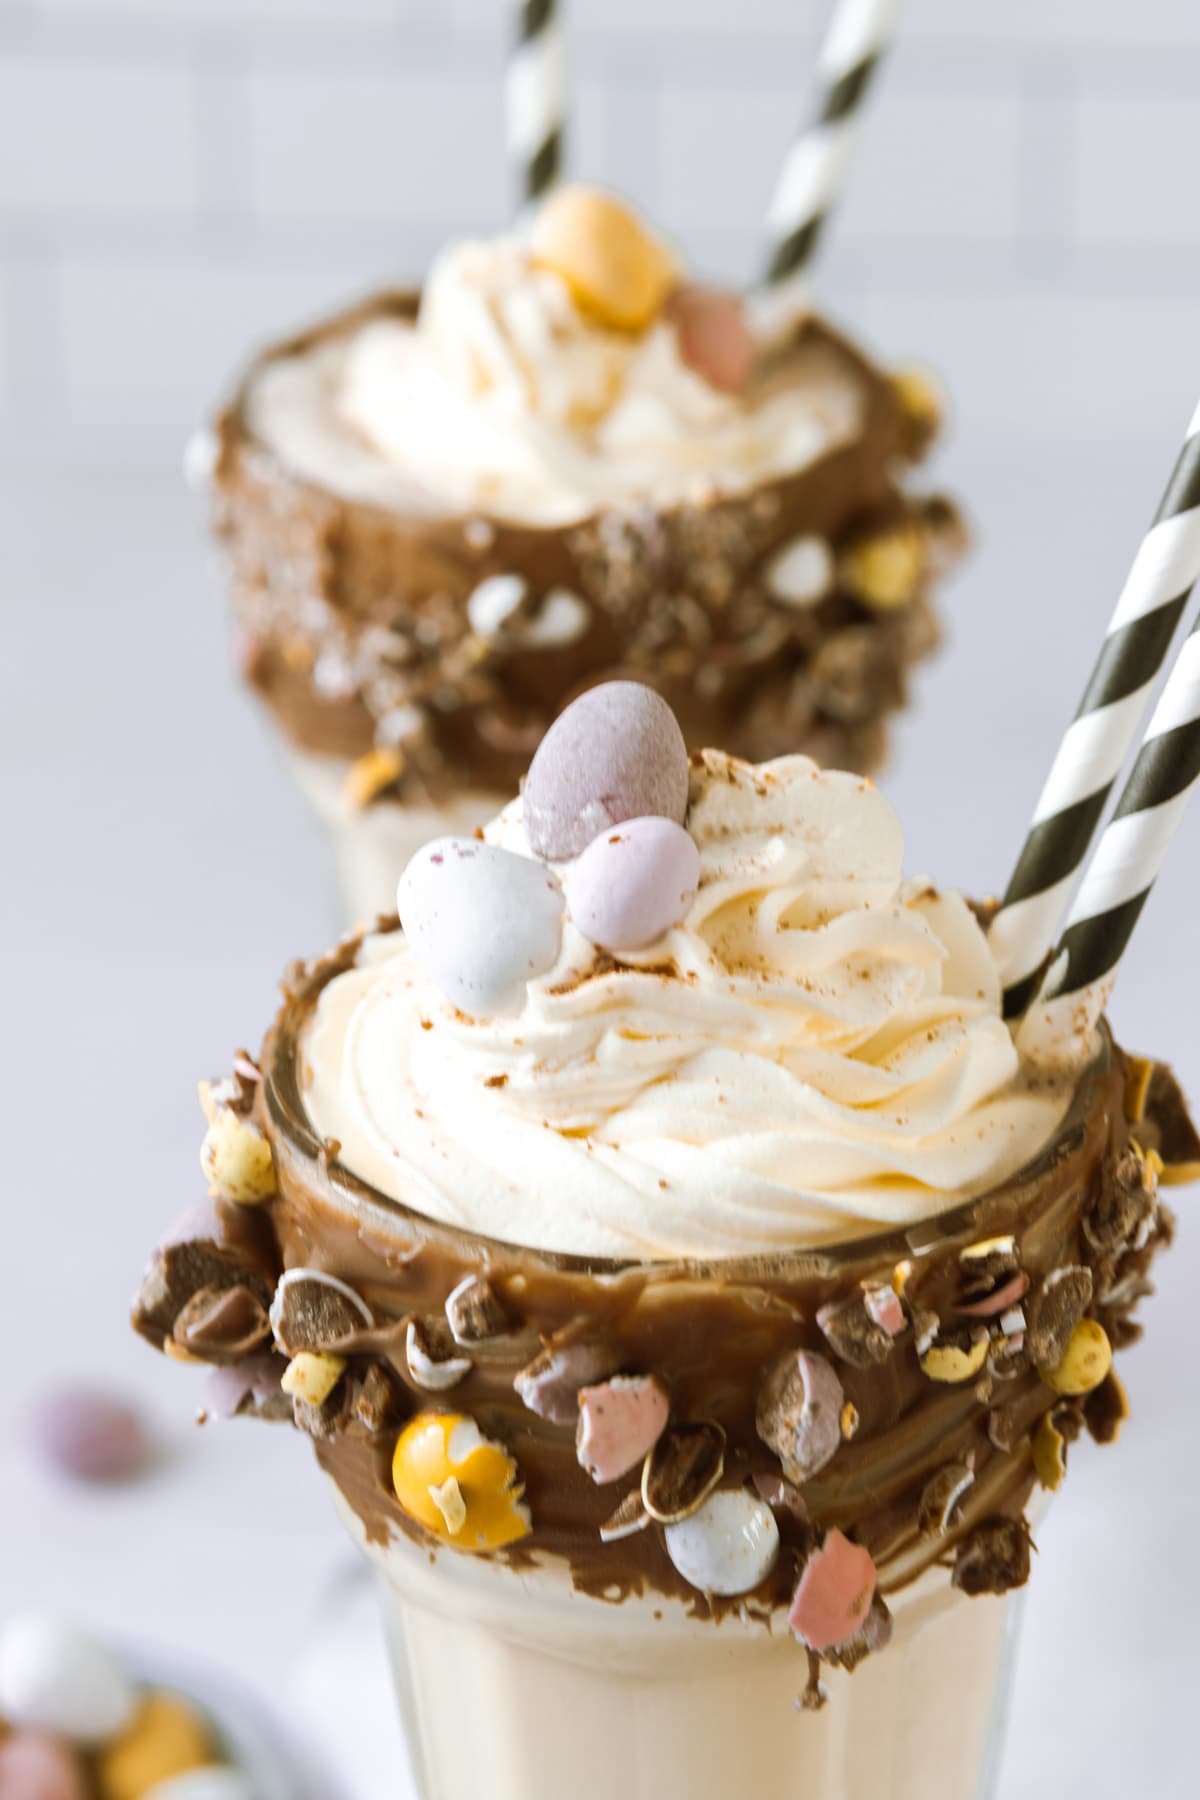 Whipped cream on top of a milkshake glass, coated in chocolate and dipped in crushed chocolate eggs